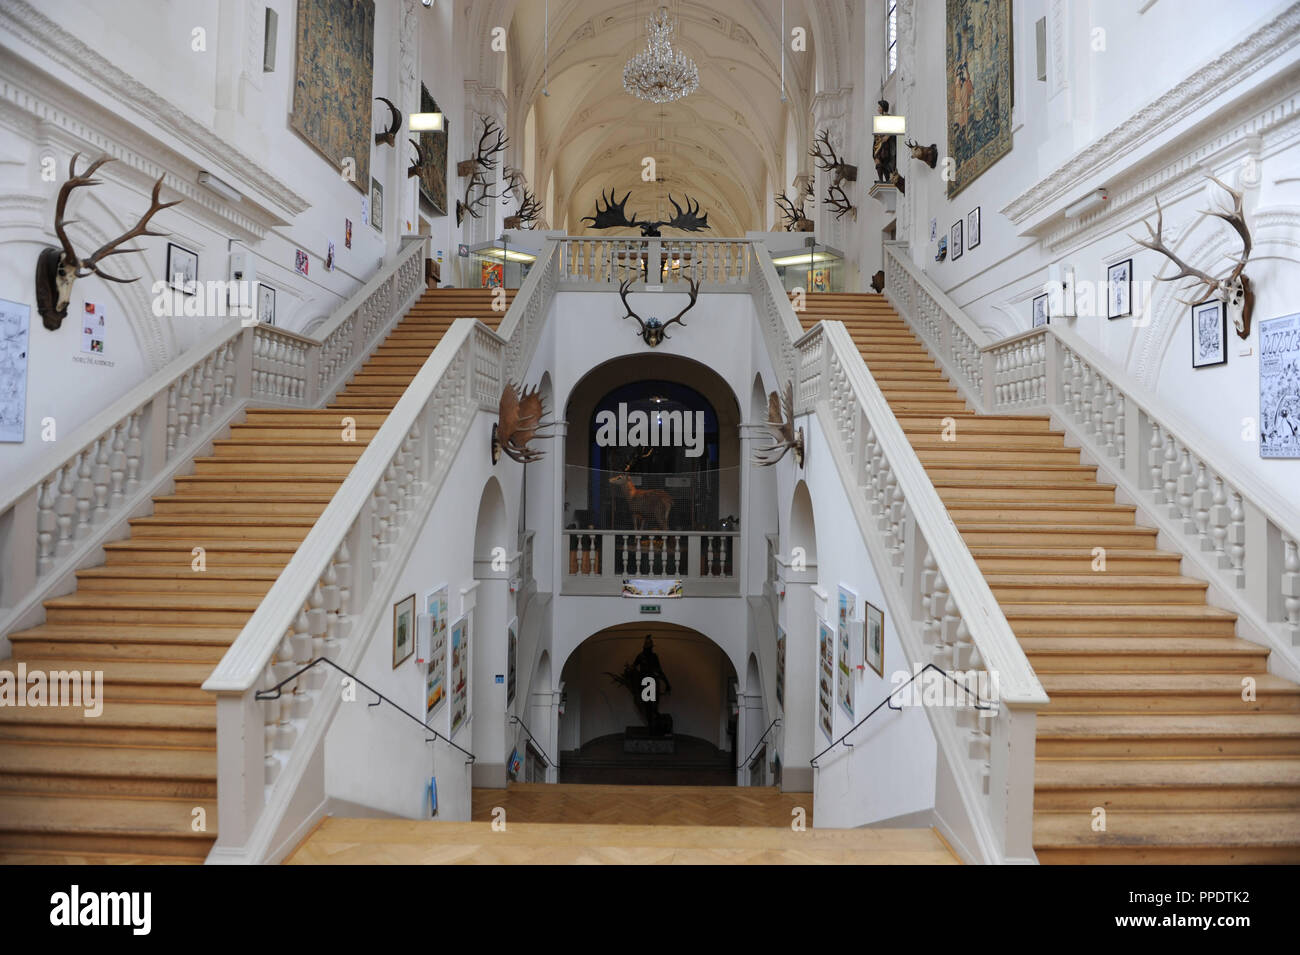 Staircase in the Jagd- und Fischereimuseum (Hunting and Fishing Museum) in the former Augustinerkirche in the center of Munich. Stock Photo